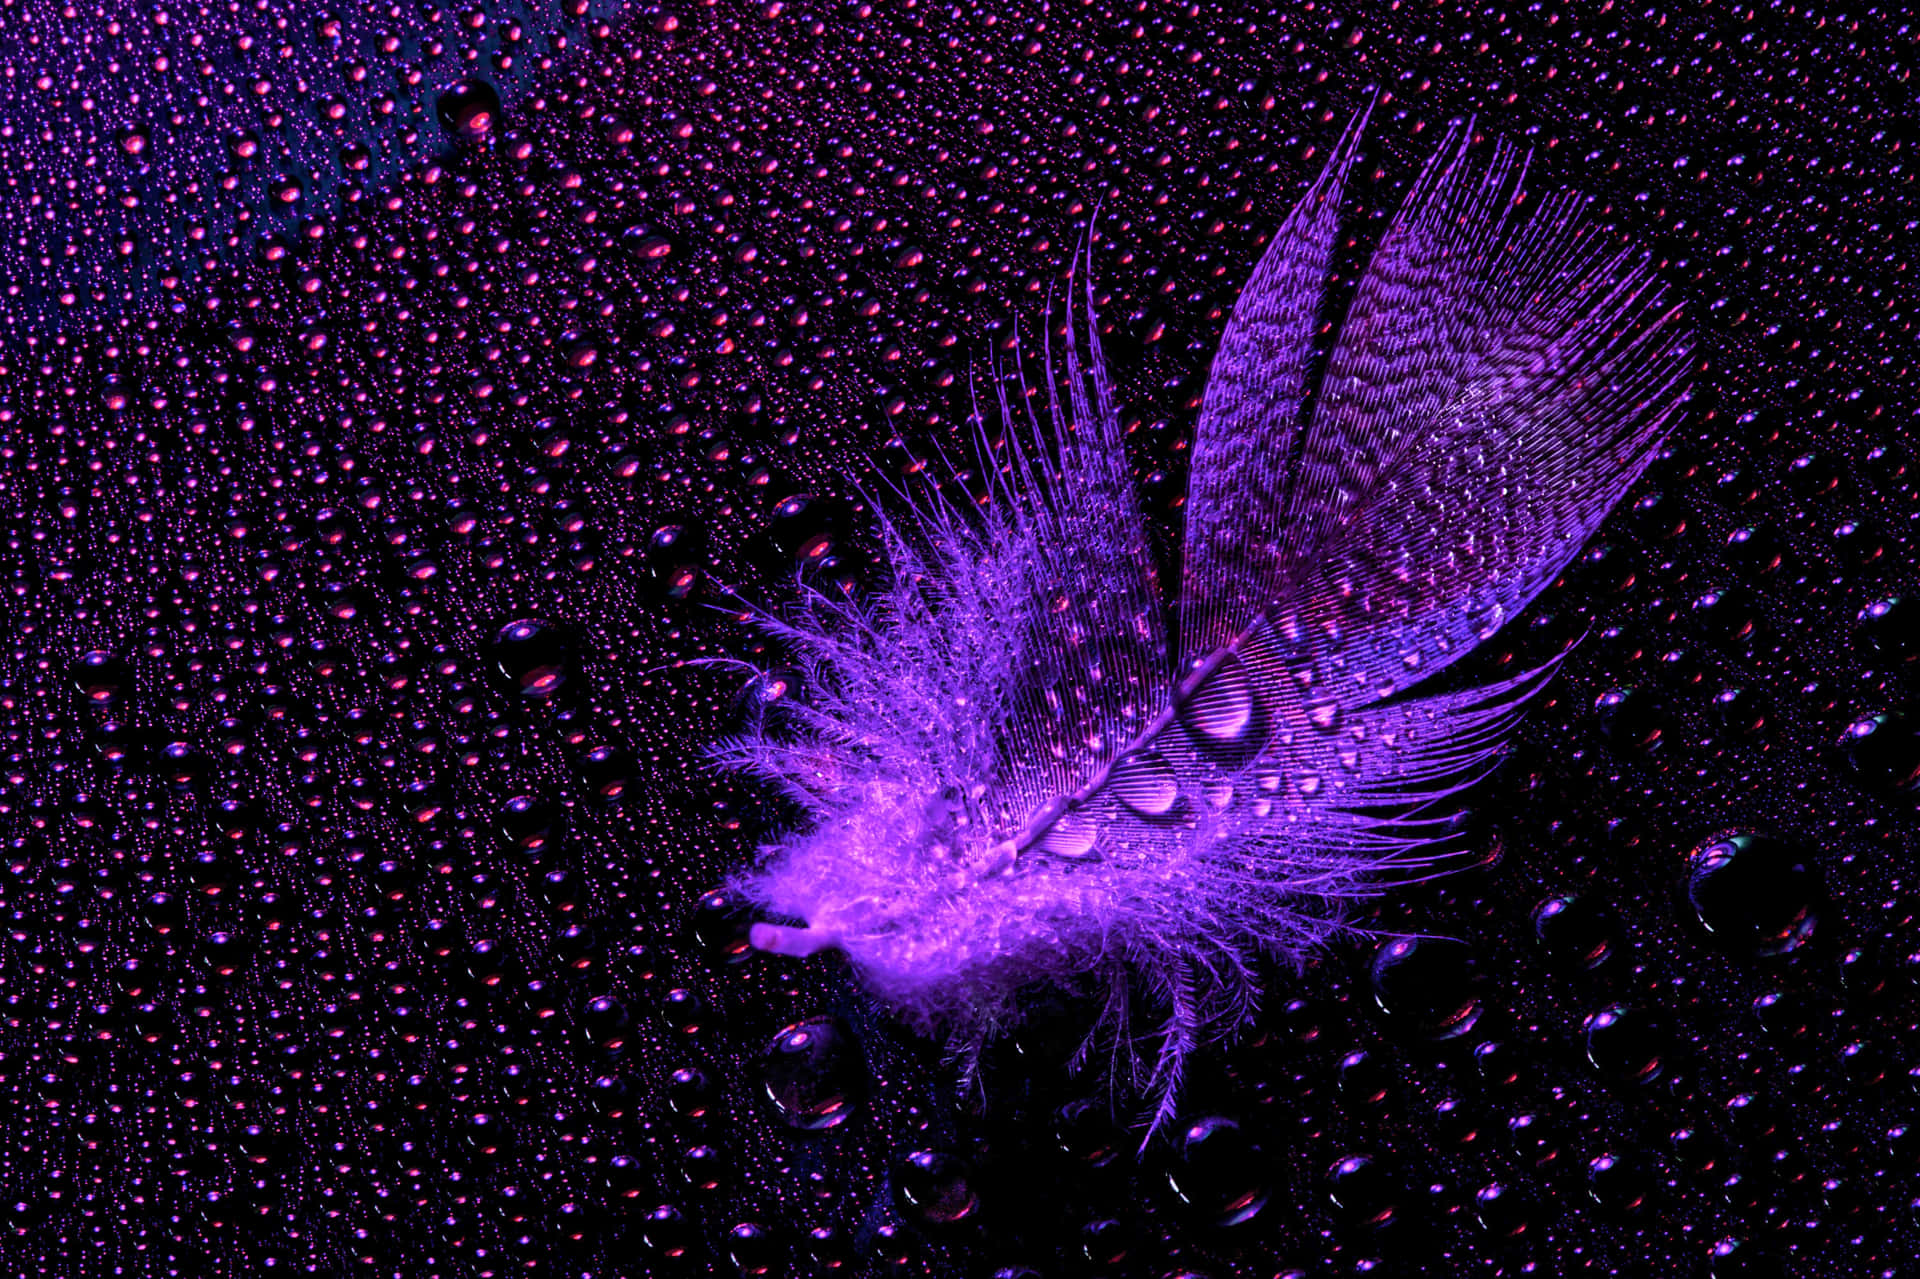 A beautiful close-up view of vibrant purple feathers. Wallpaper